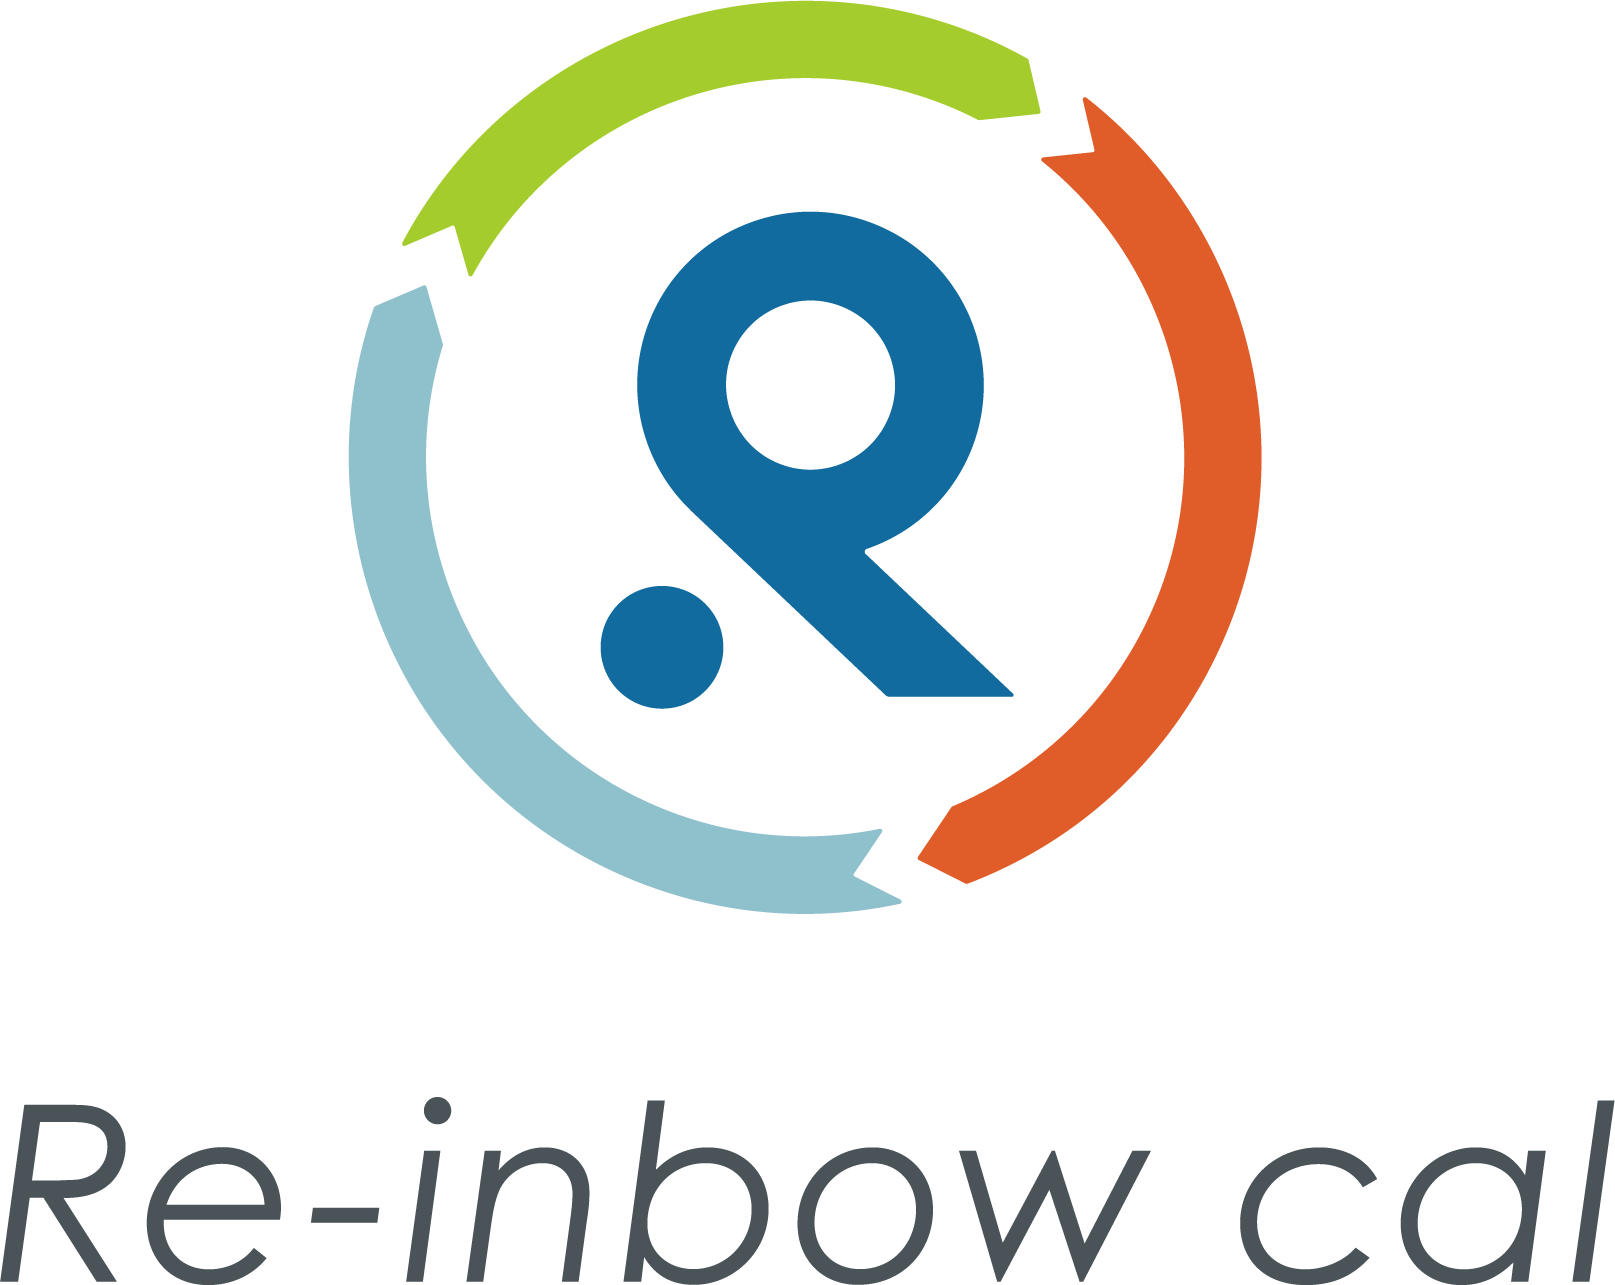 Re-inbow cal